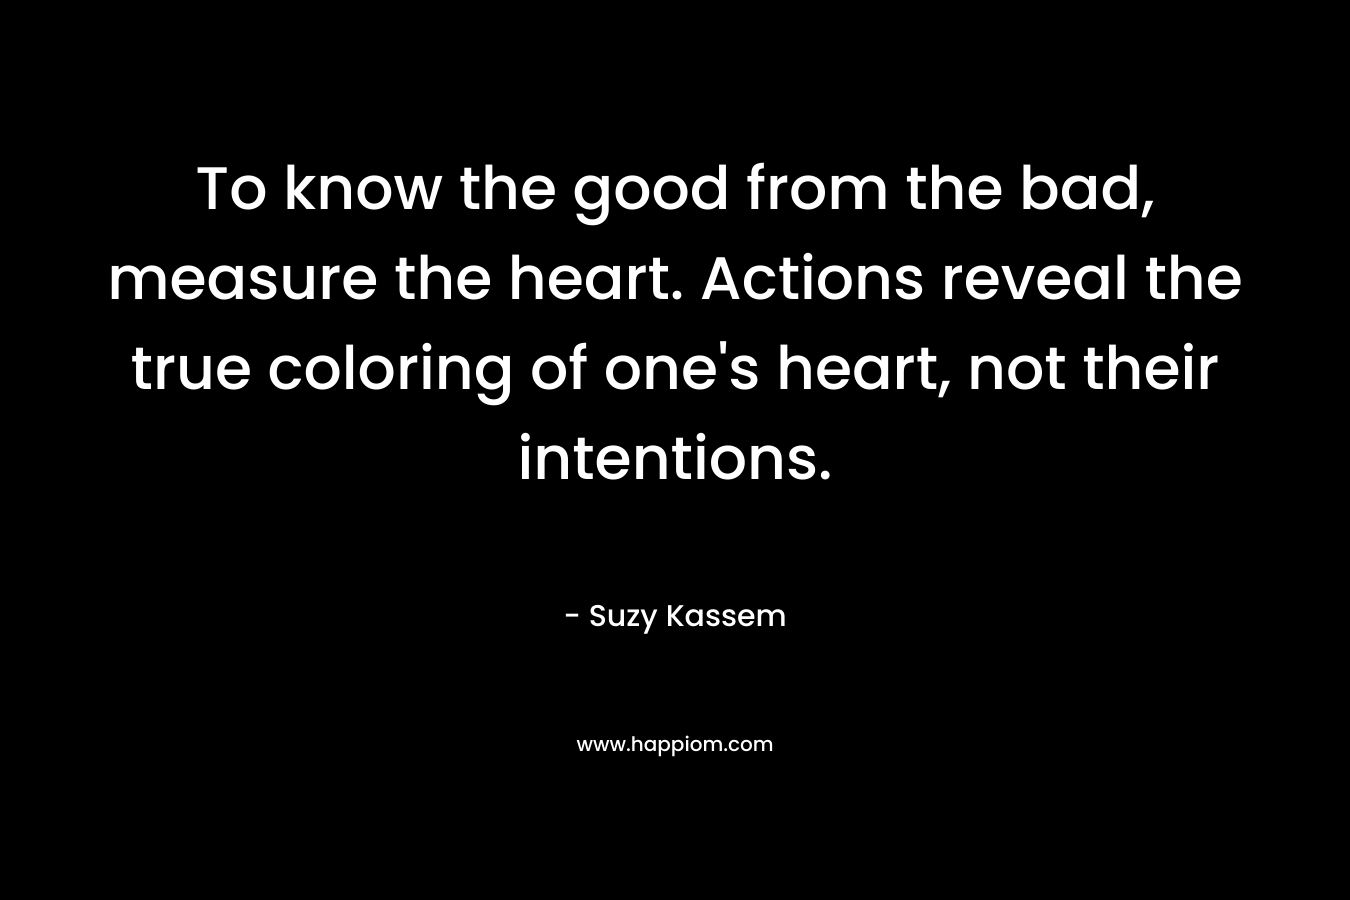 To know the good from the bad, measure the heart. Actions reveal the true coloring of one's heart, not their intentions.